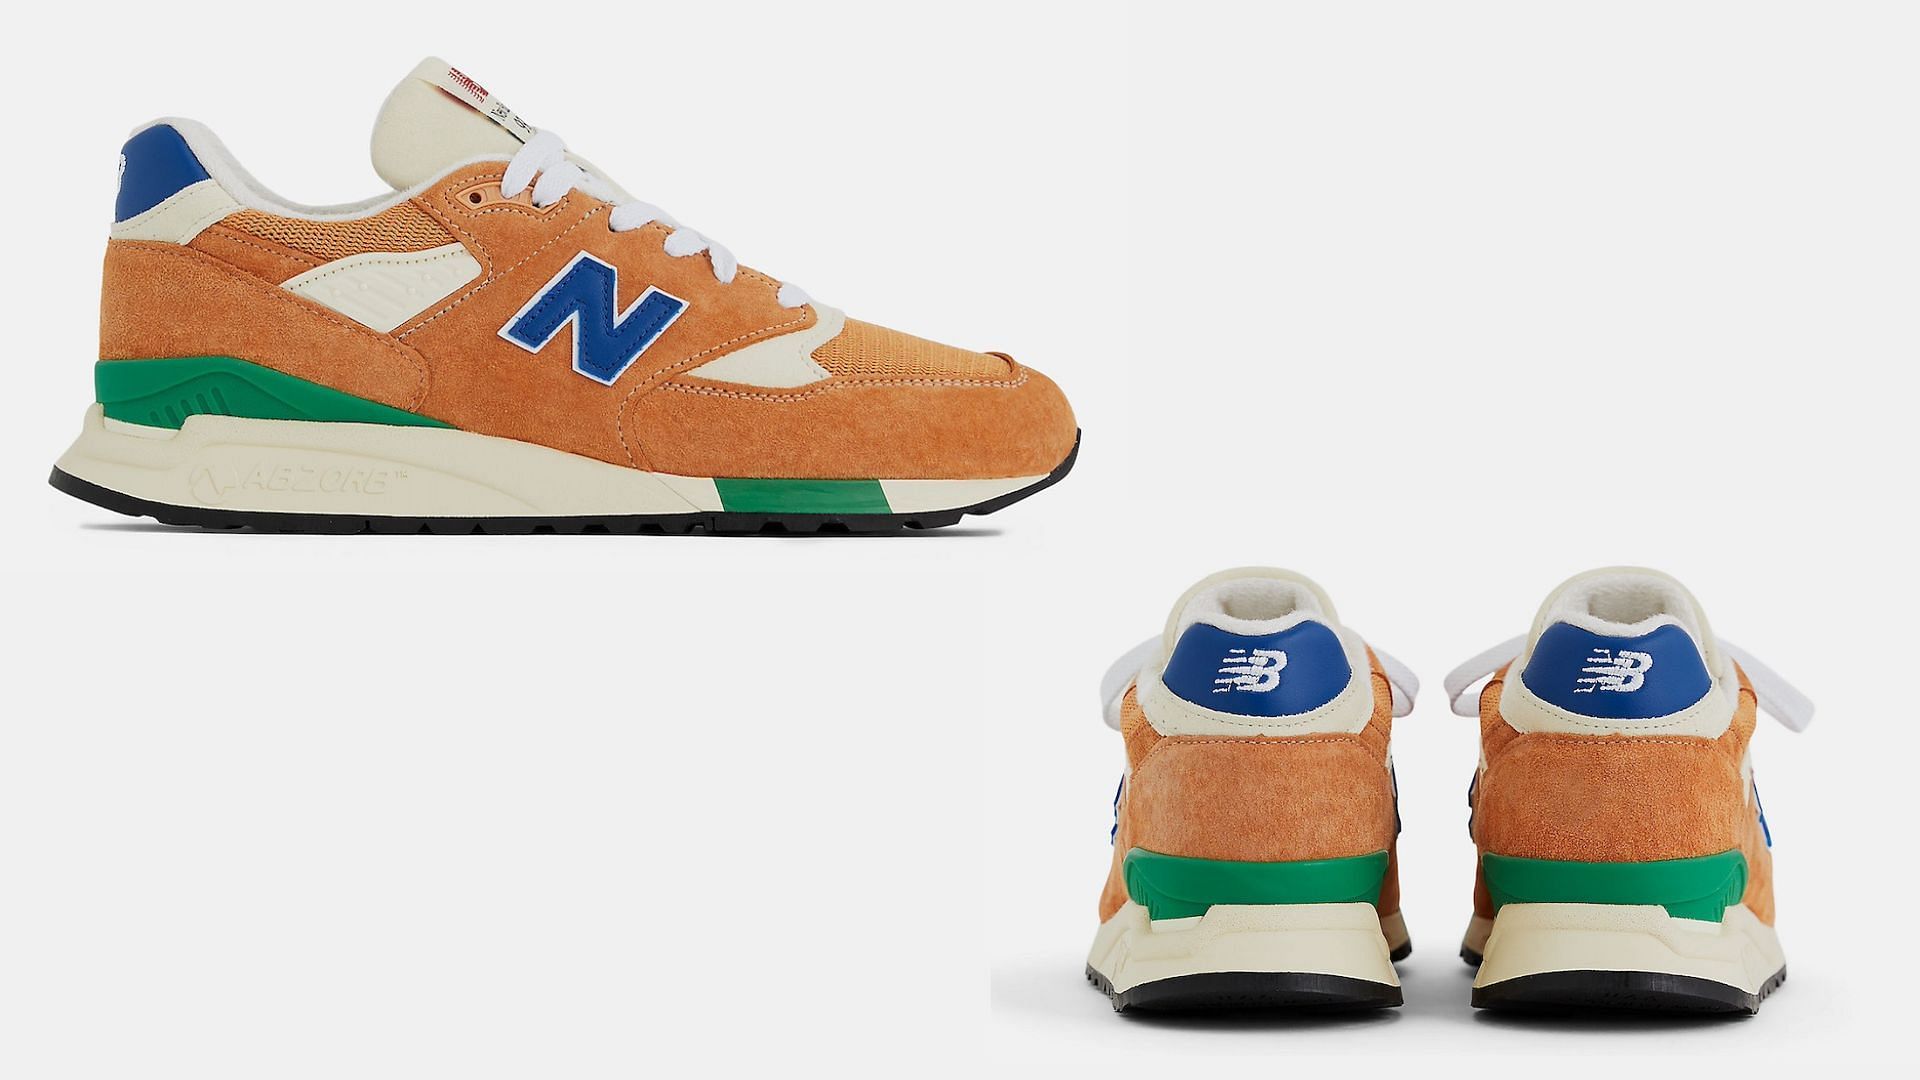 made in usa: New Balance 998 Made in USA “Sepia Atlantic Blue” shoes ...